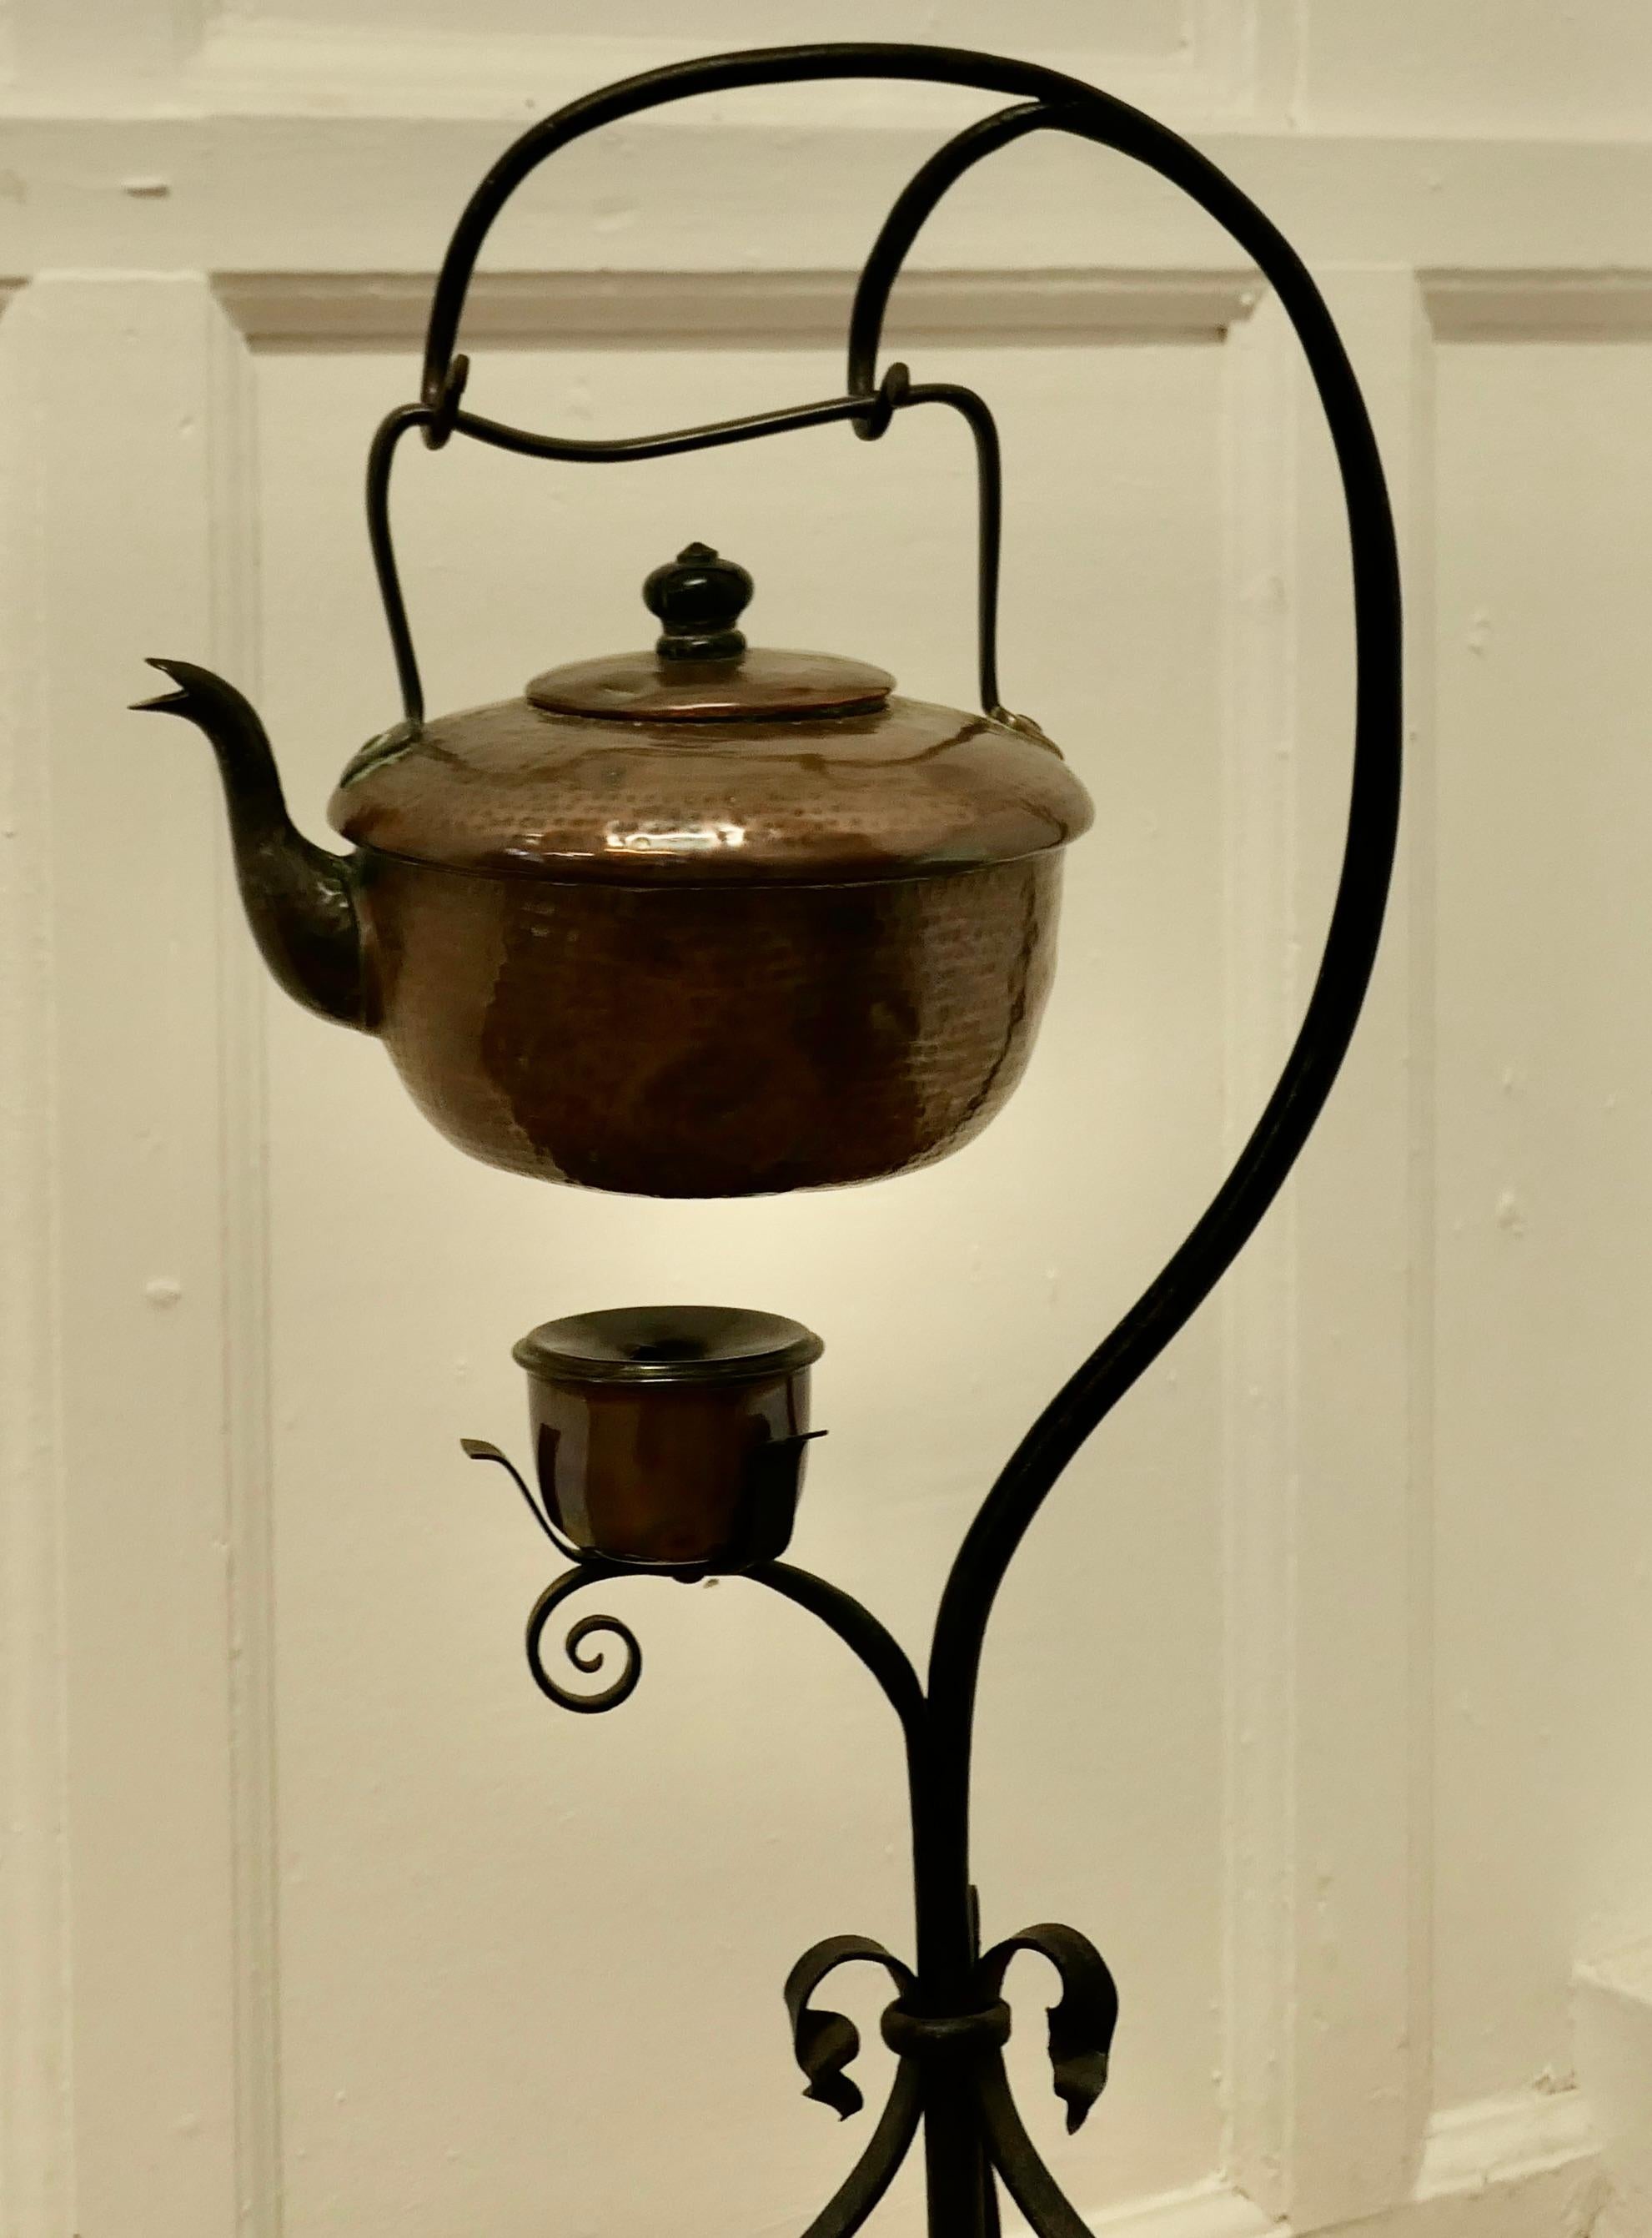 Folk Art 19th Century Copper Swinging Sprit Kettle on a Wrought Iron Stand For Sale